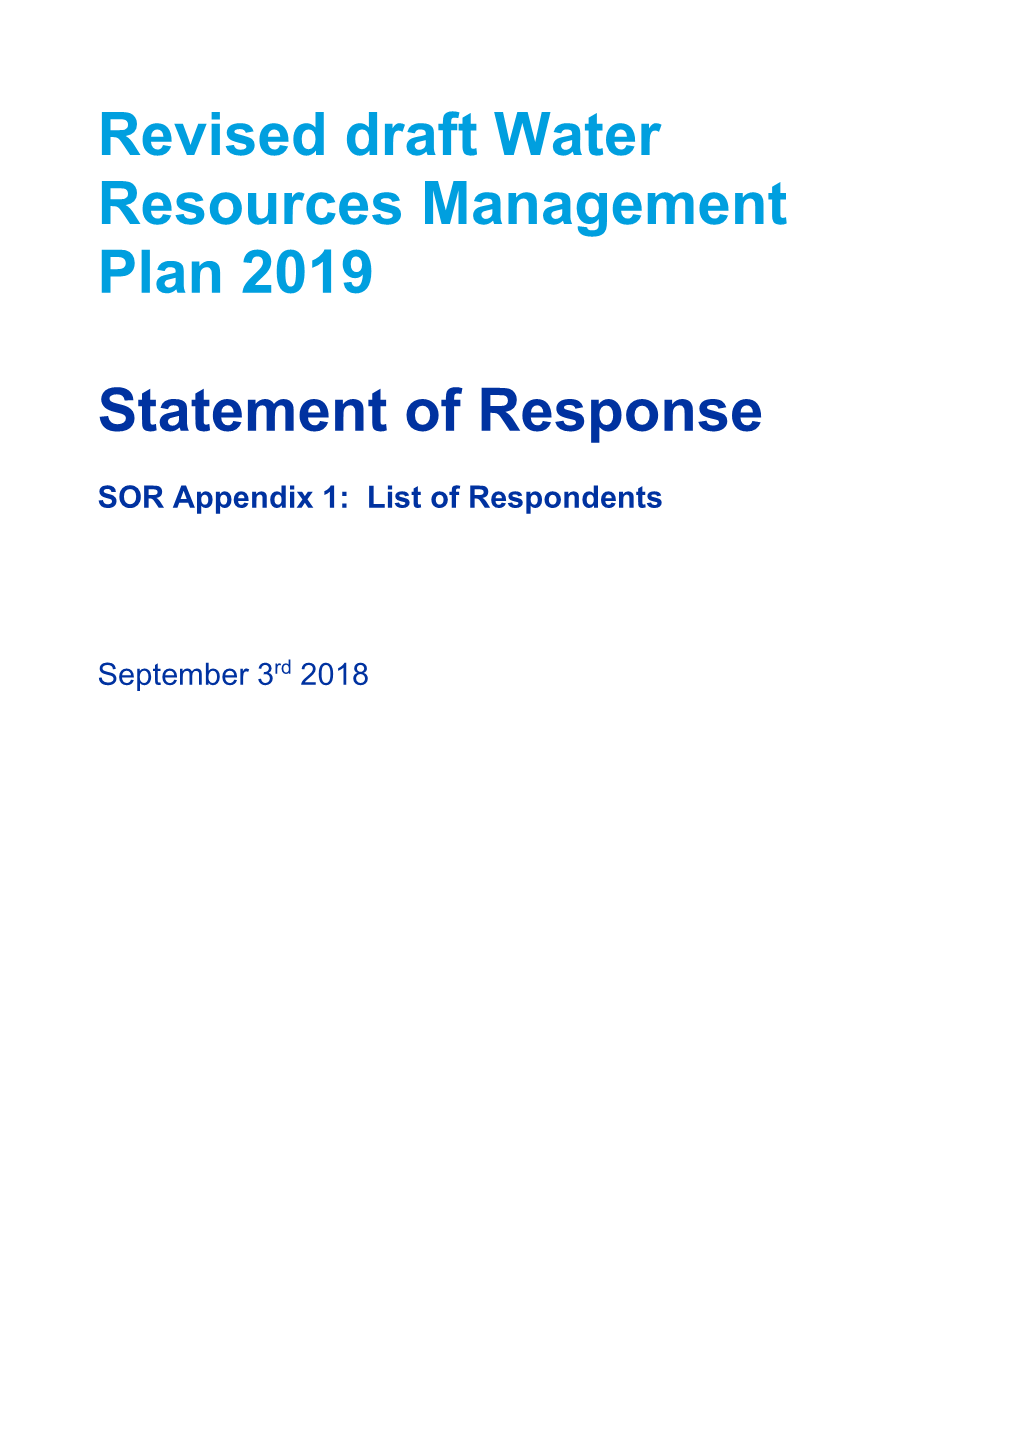 Revised Draft Water Resources Management Plan 2019